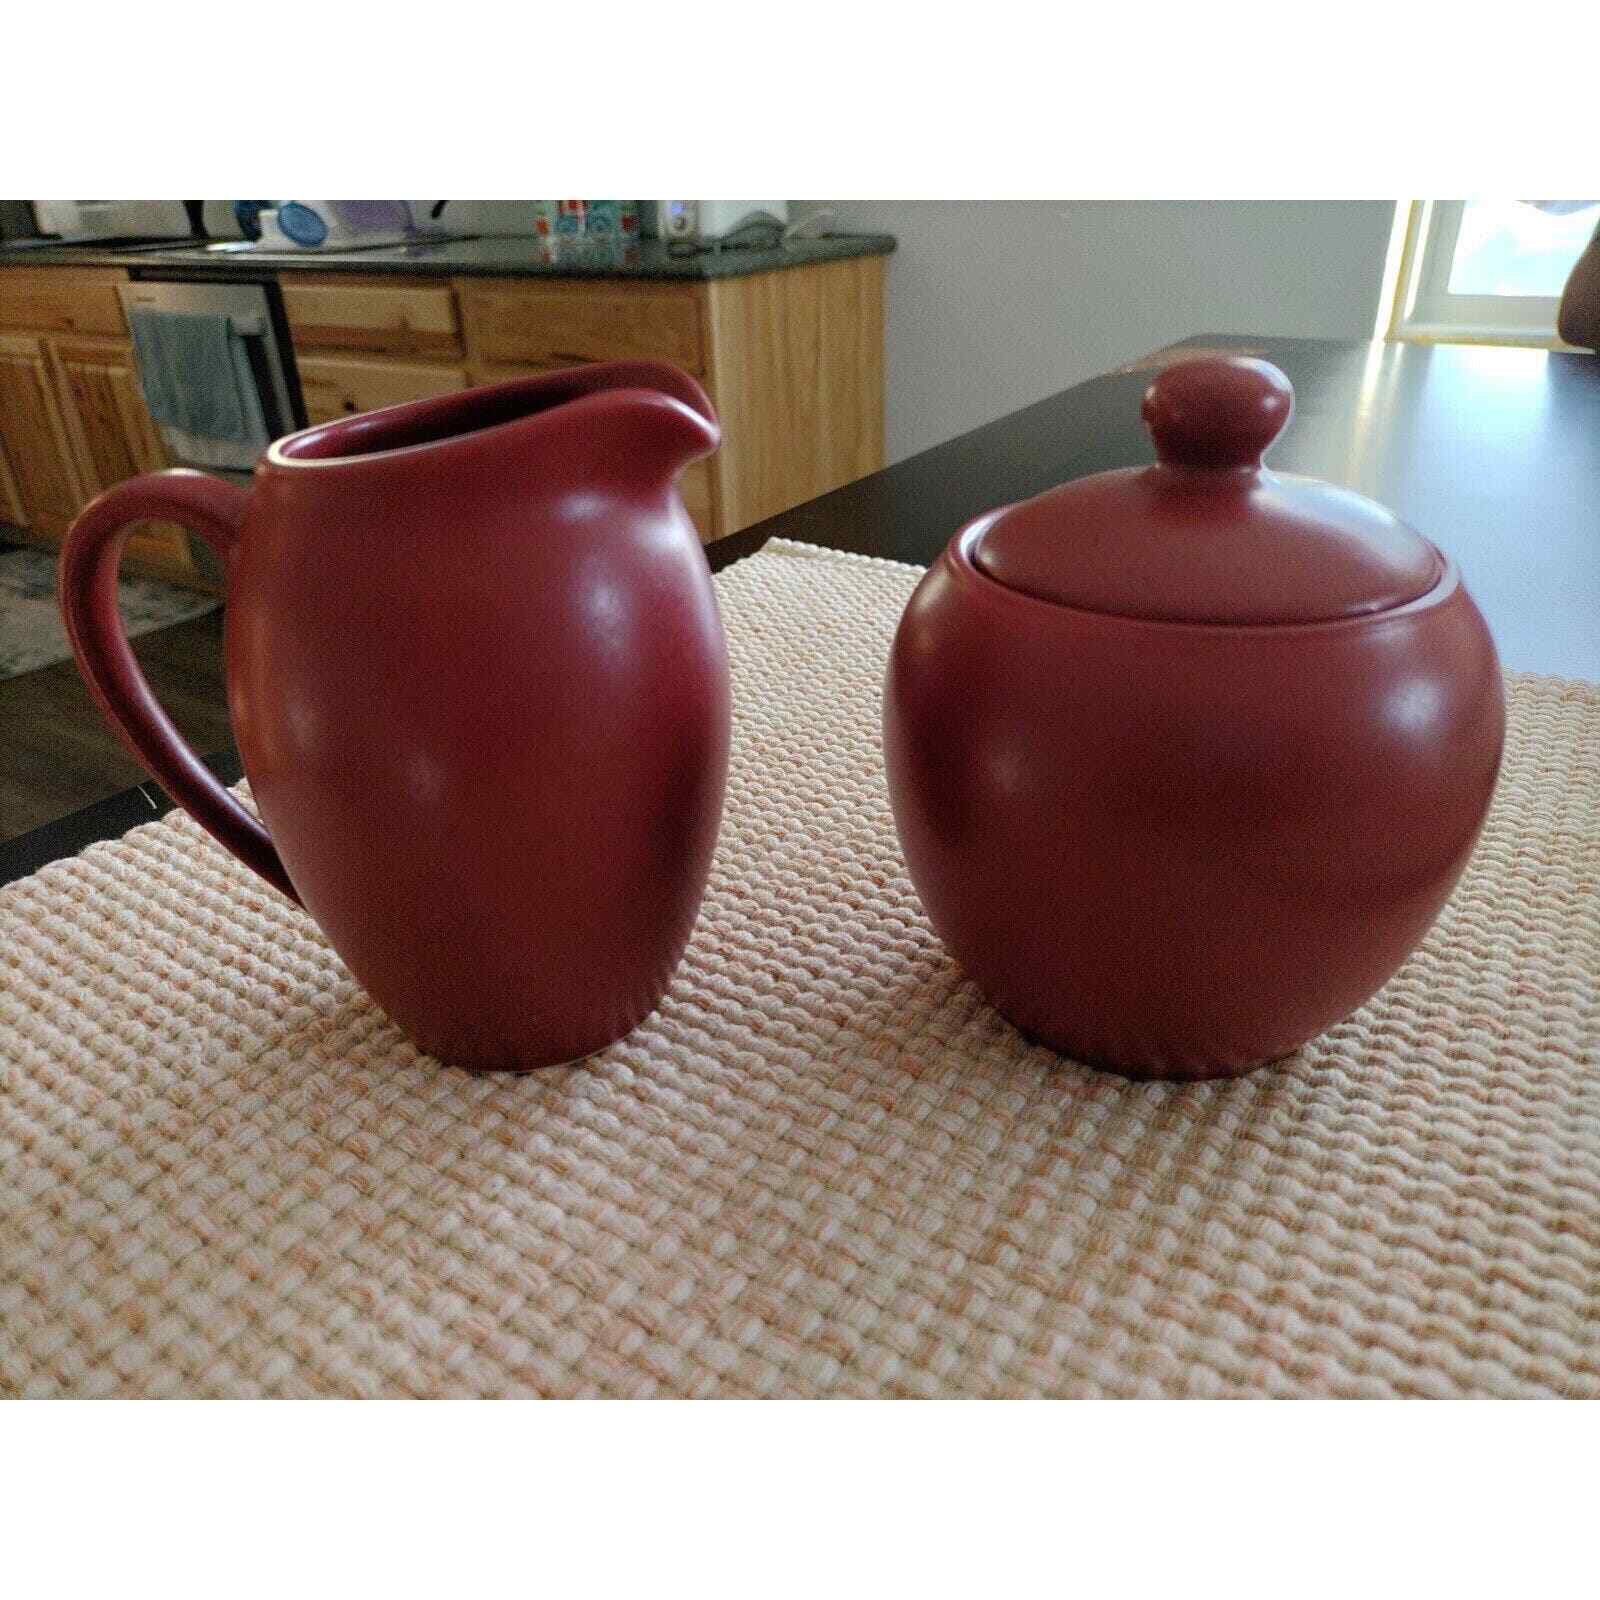 GORGEOUS NORITAKE COLOR WAVE RASPBERRY CREAMER AND SUGAR - VERY WELL BUILT